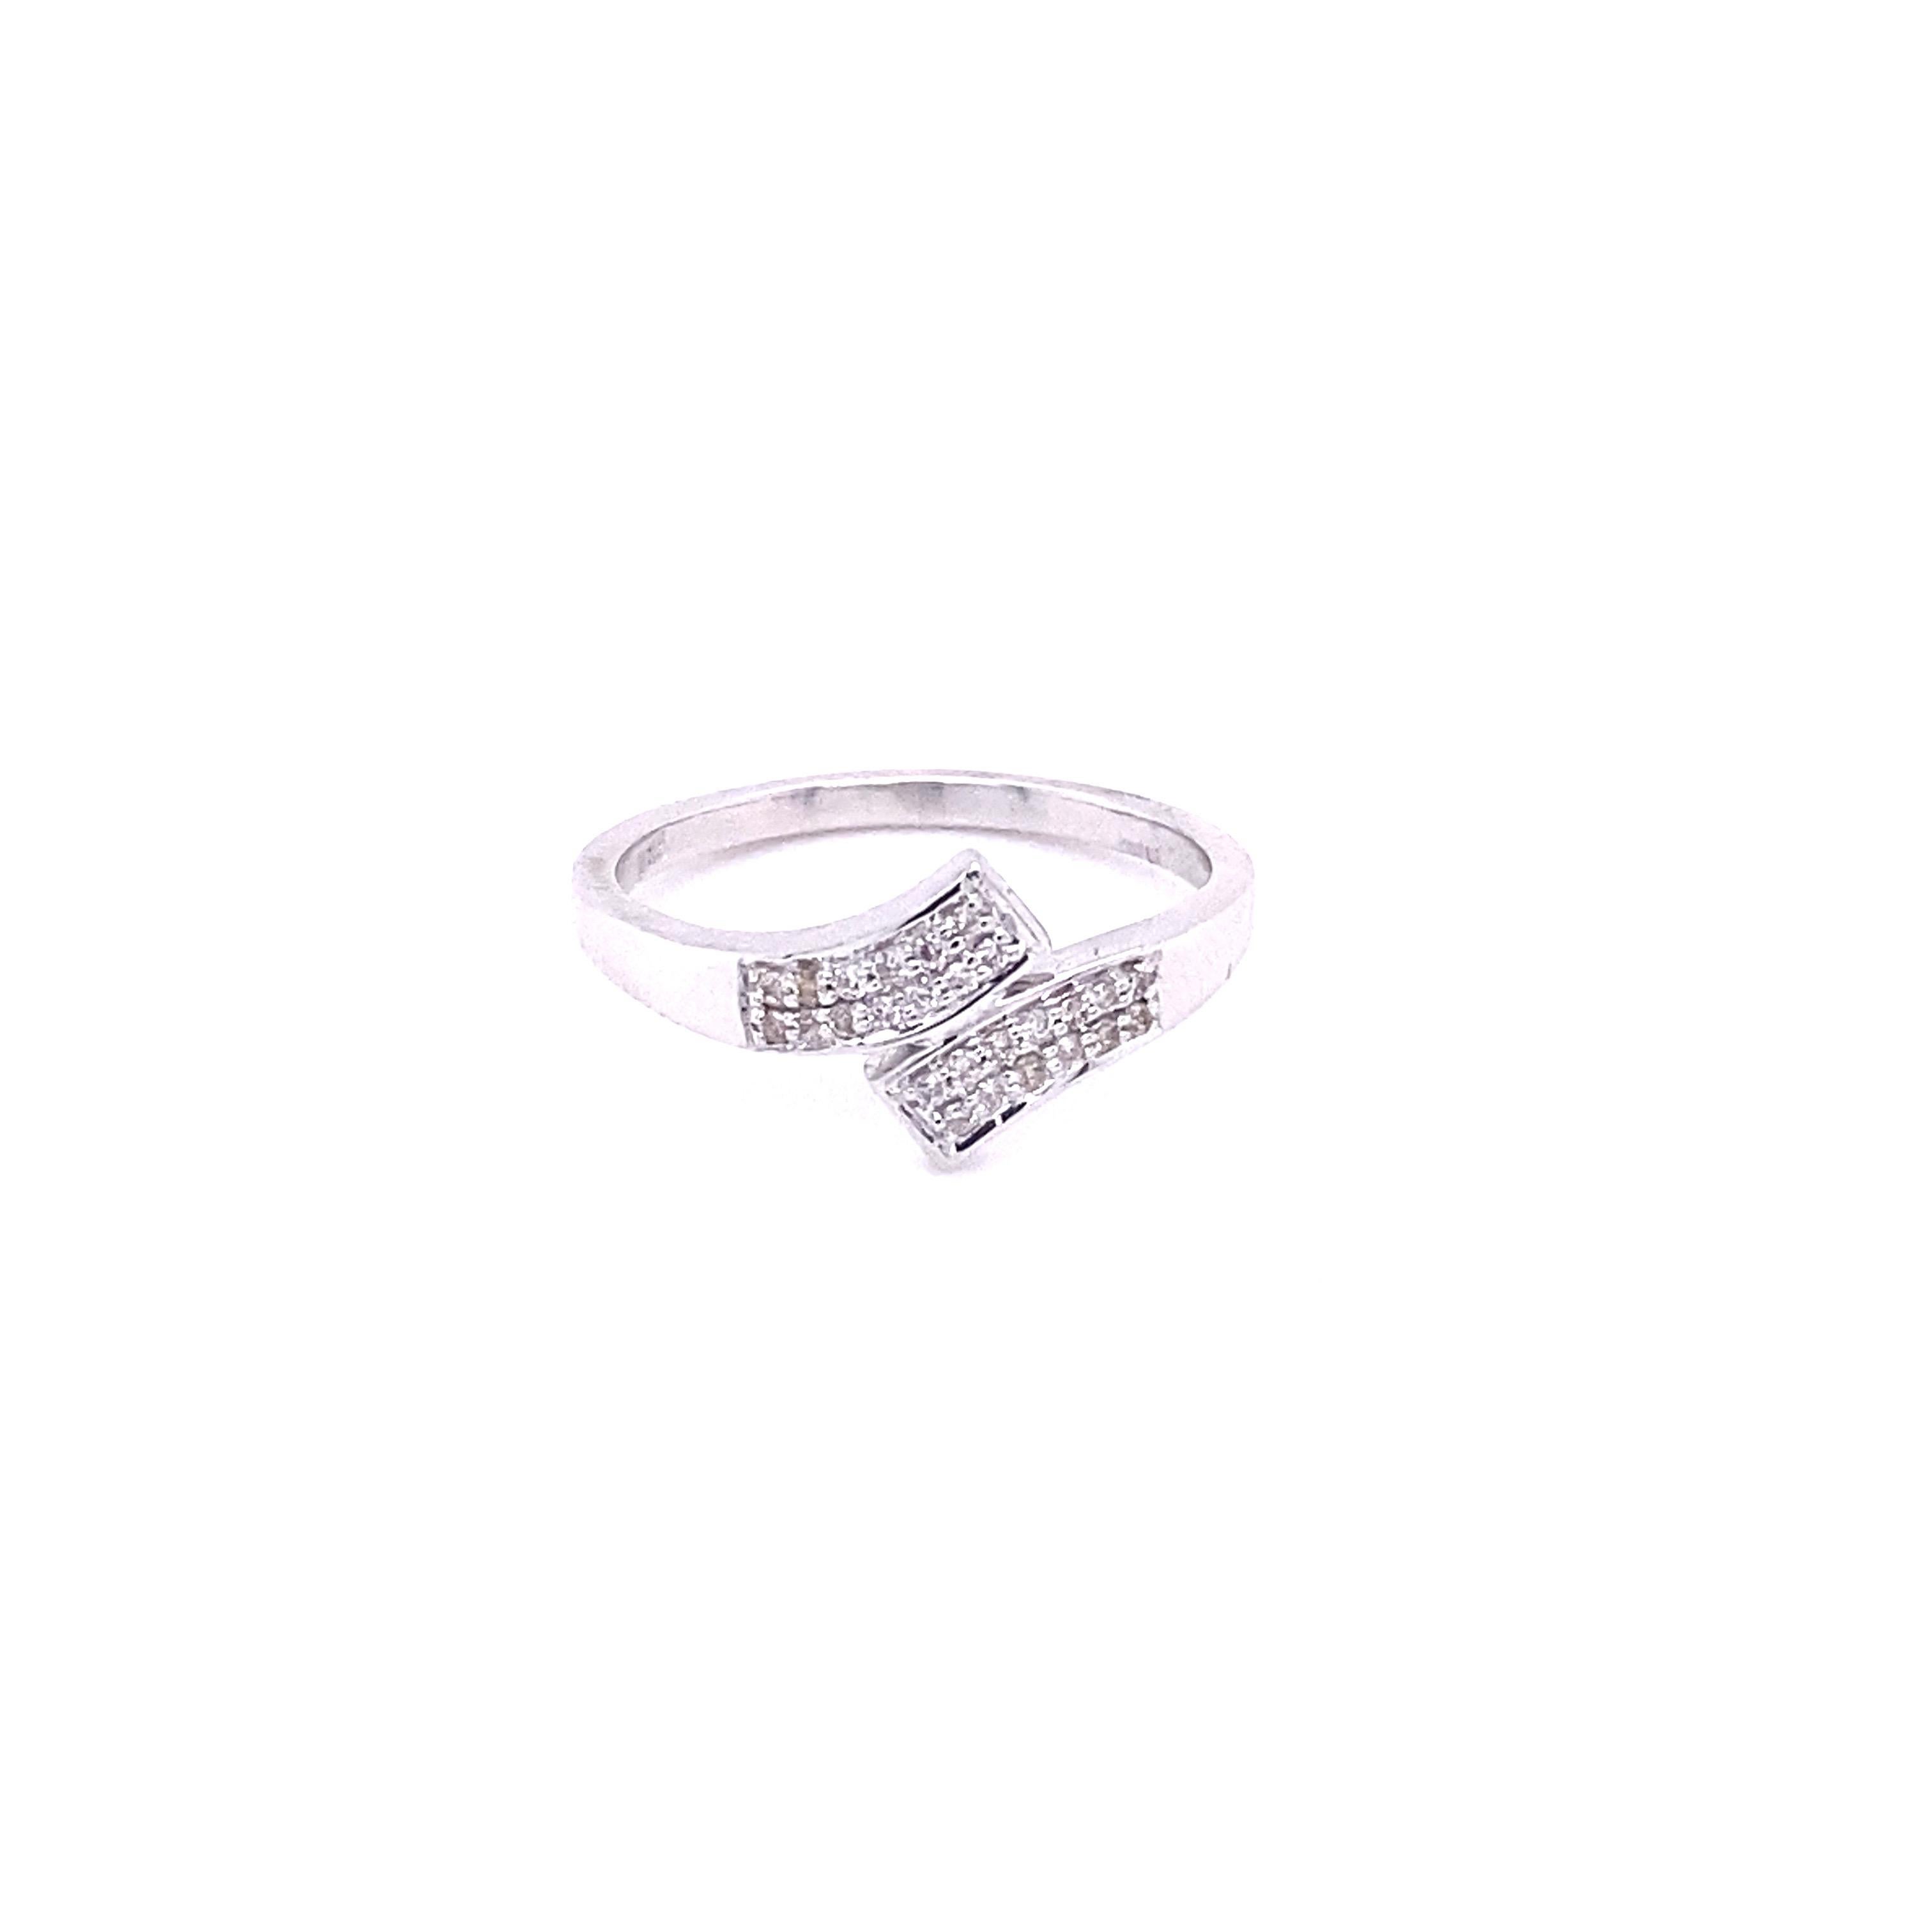 A bypass shank and some natural diamonds can change the entire appearance of the night! This diamond ring is made in 14k white gold and set with beautiful white round diamonds in a prong style setting! A very petite ring for a grand night! You can